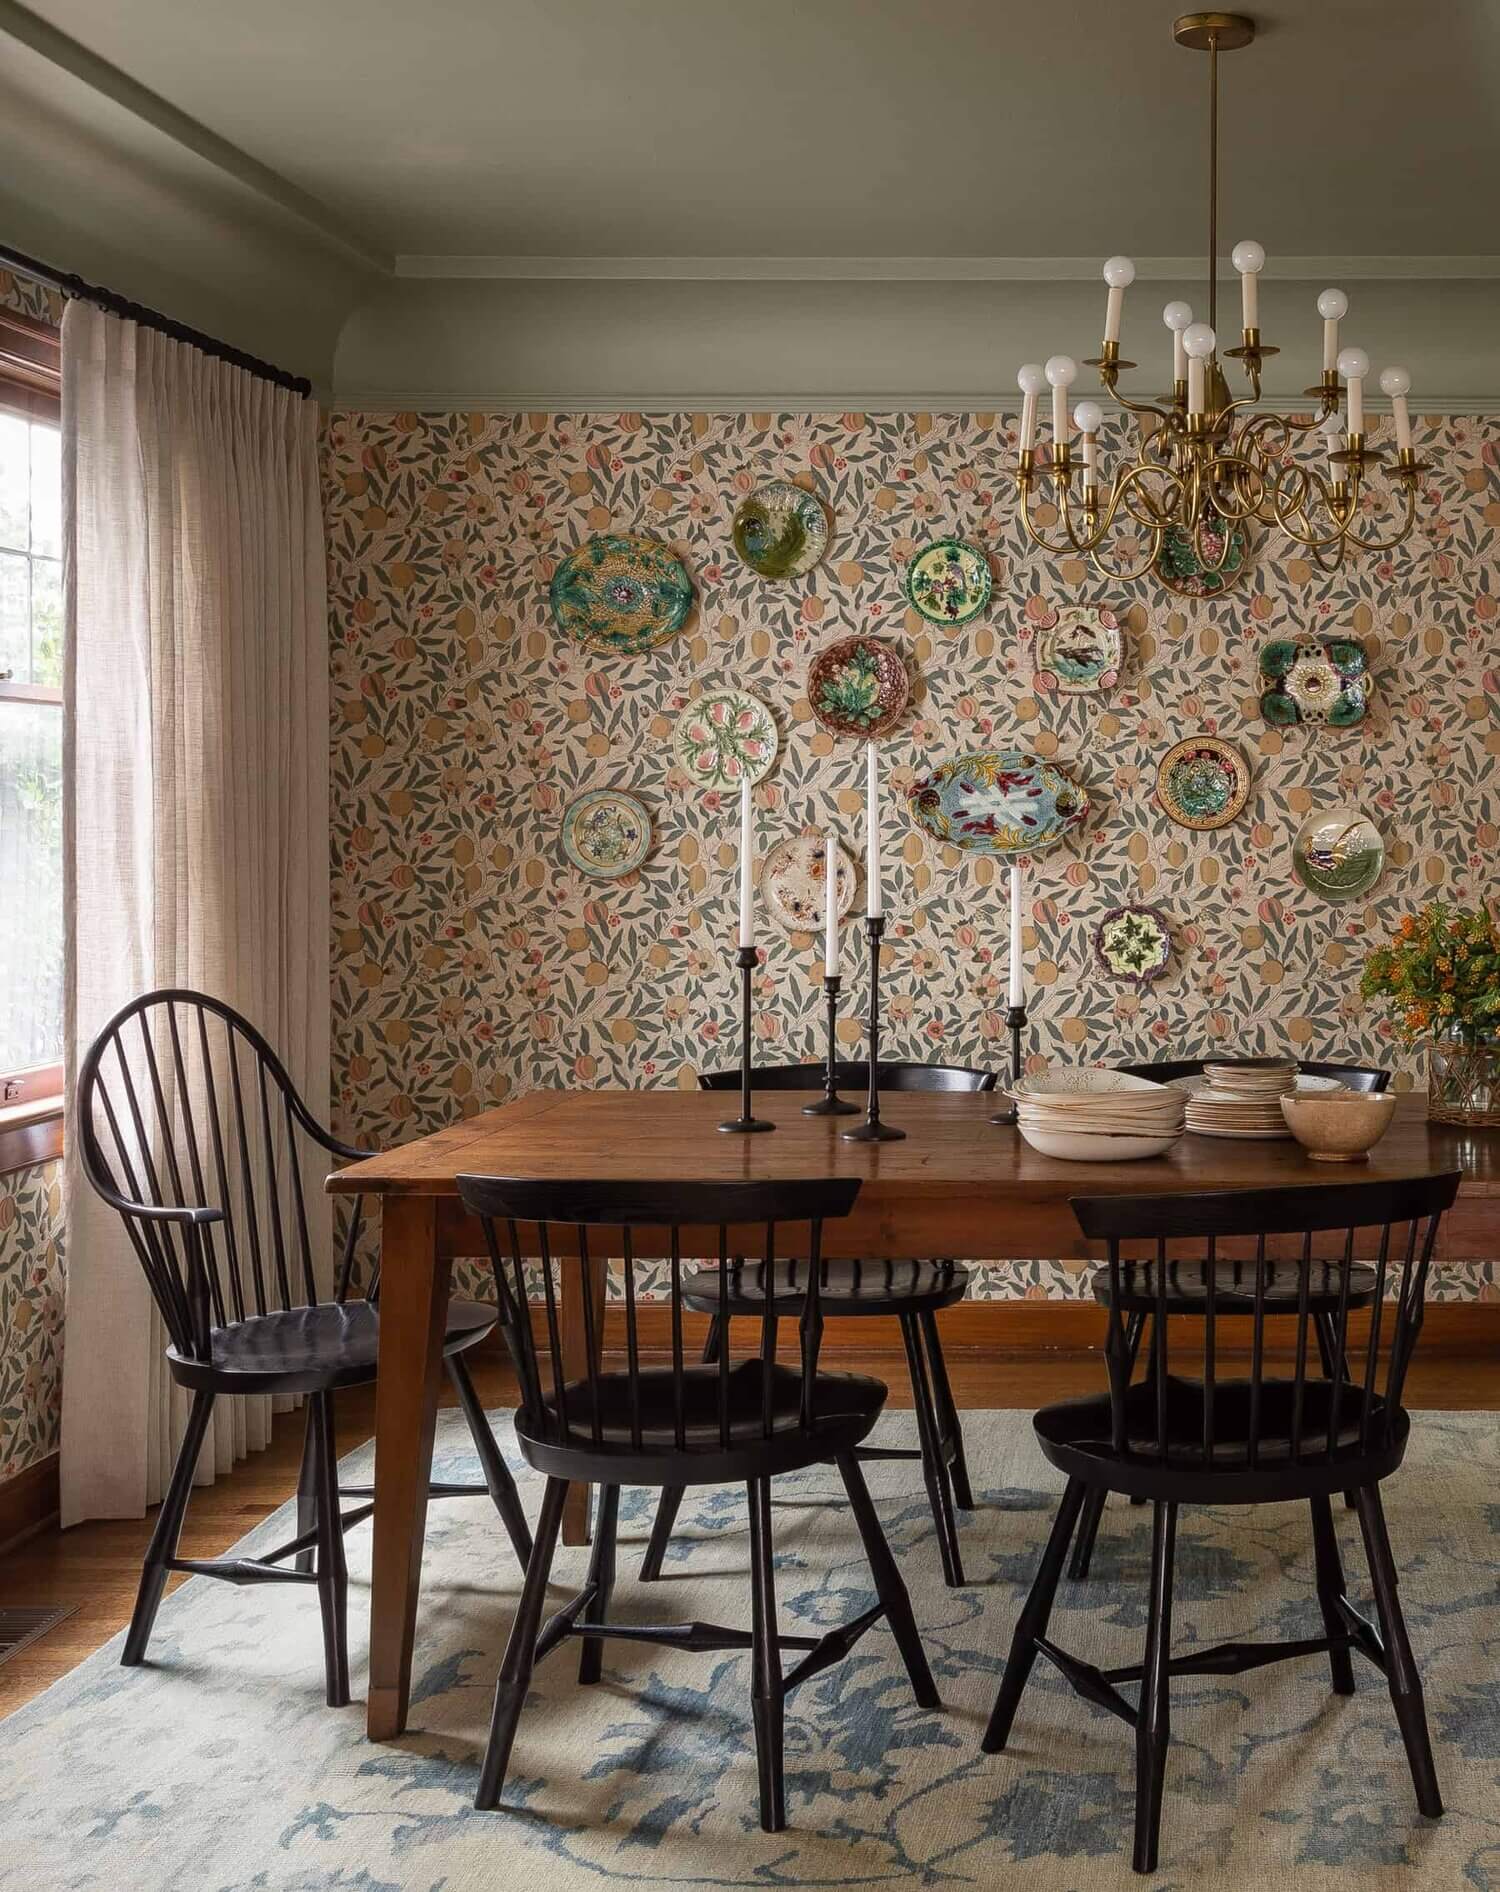 Diningroomwithvinatgefarmtableandcolorfulwallpaper TheNordroom1 Soothing Colors in Designer Heidi Caillier's Eclectic Washington Home